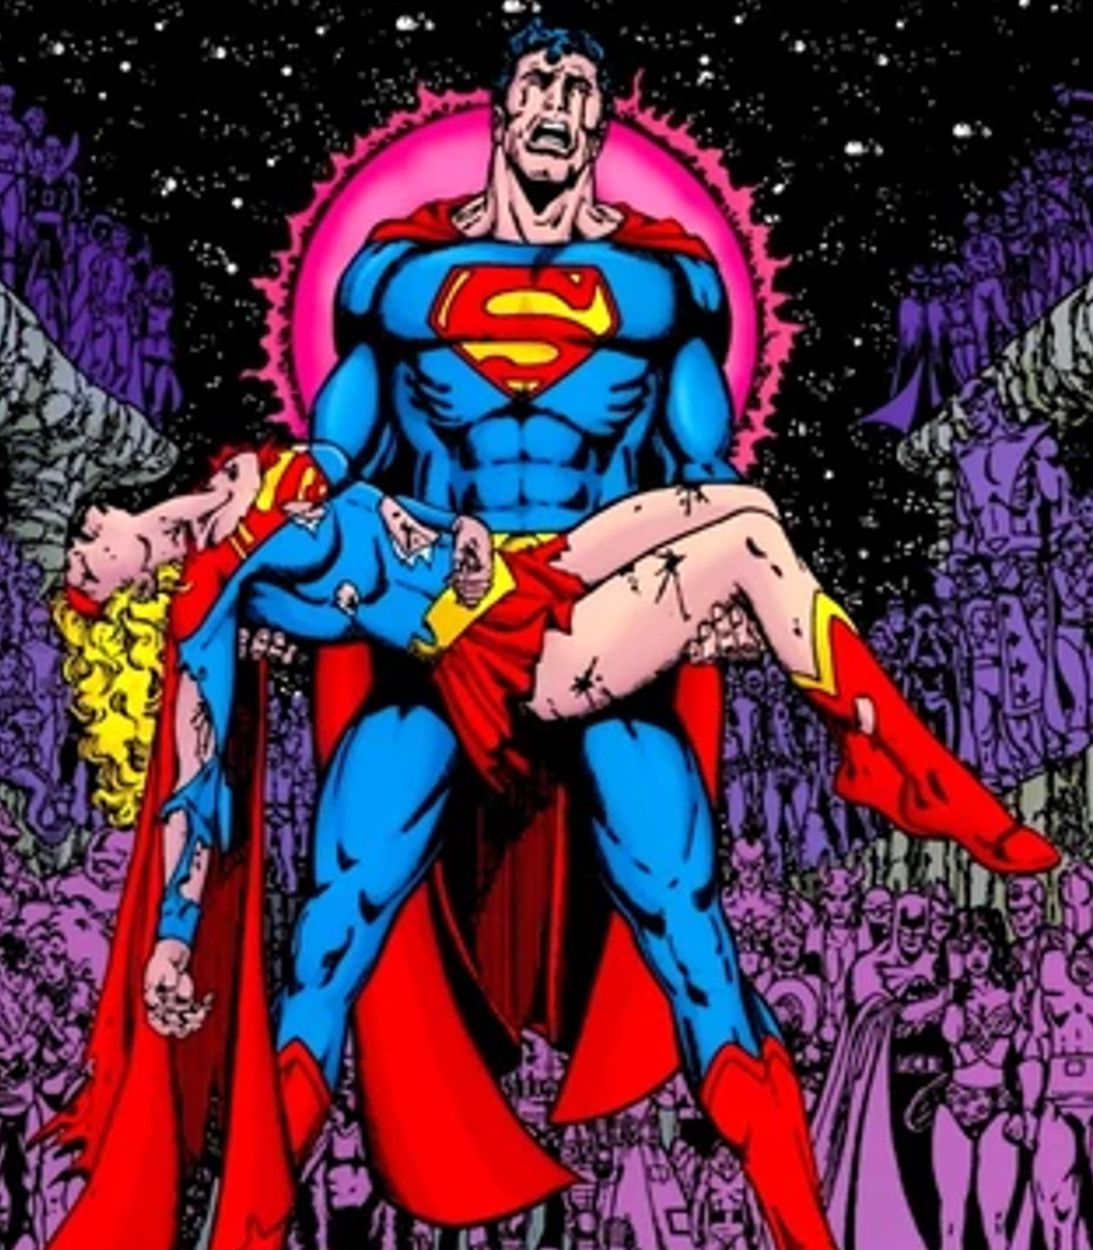 Crisis On Infinite Earths The Death of Supergirl vertical